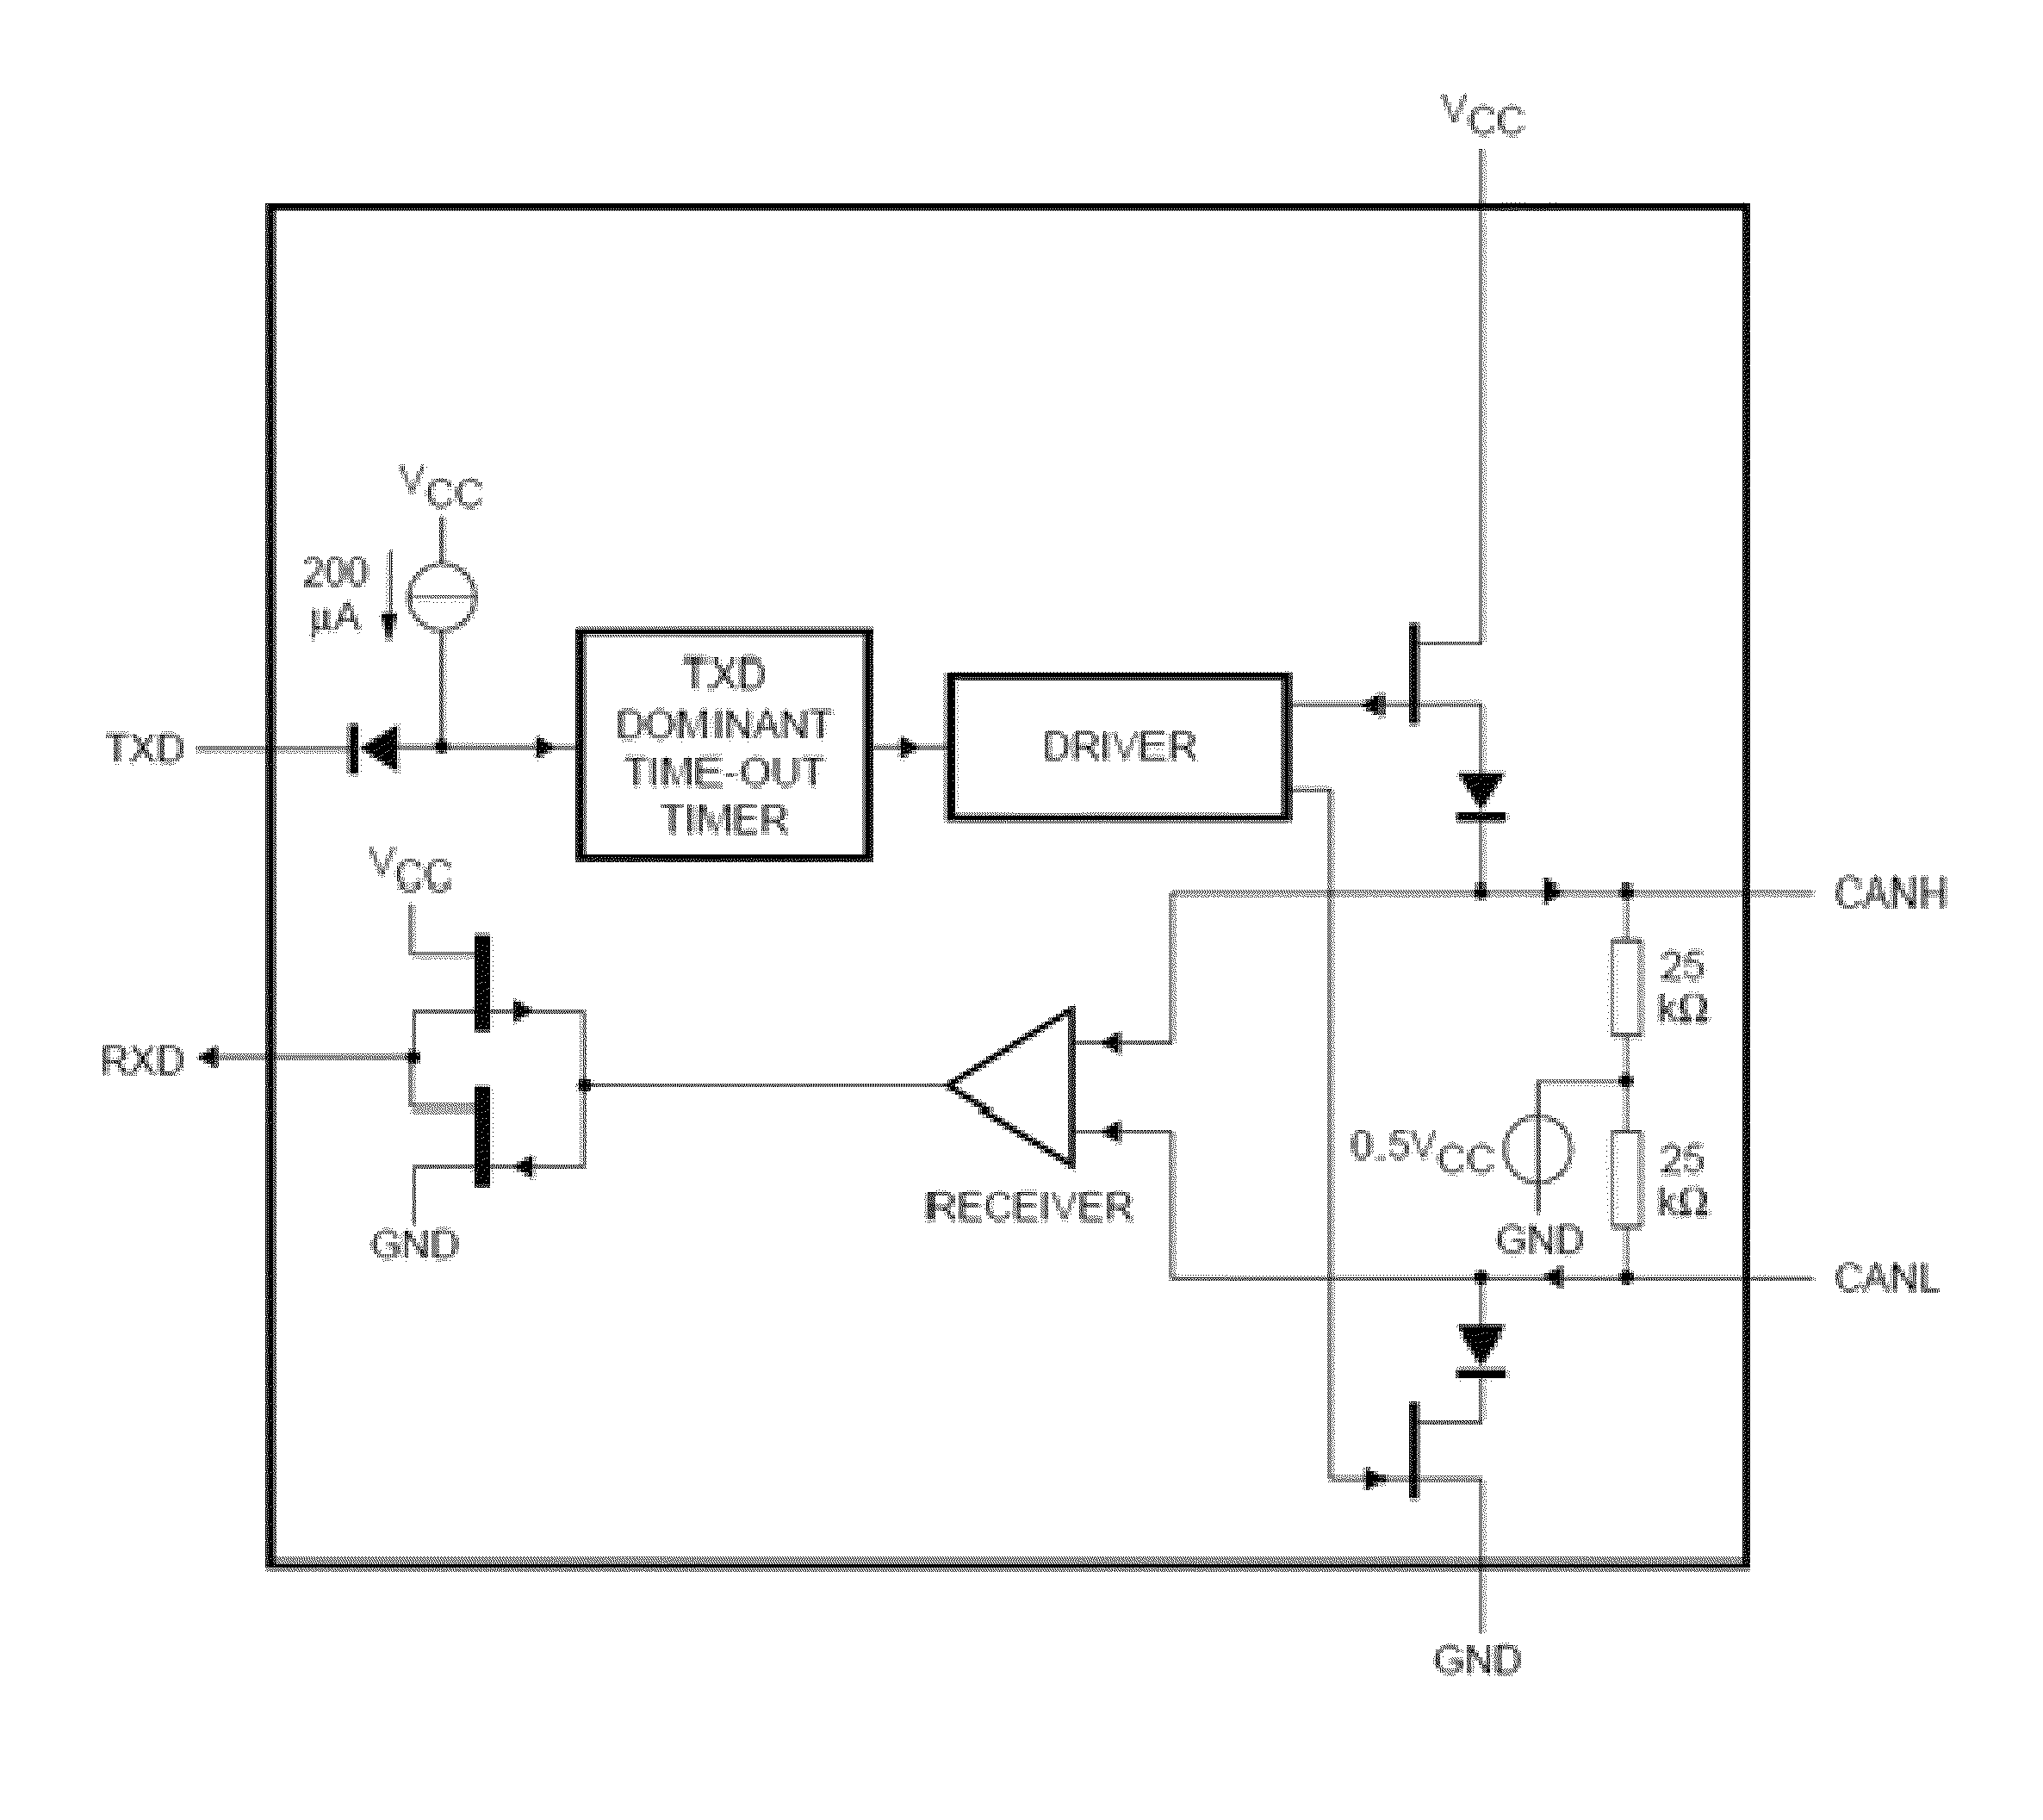 Method for protecting vehicle data transmission system from intrusions